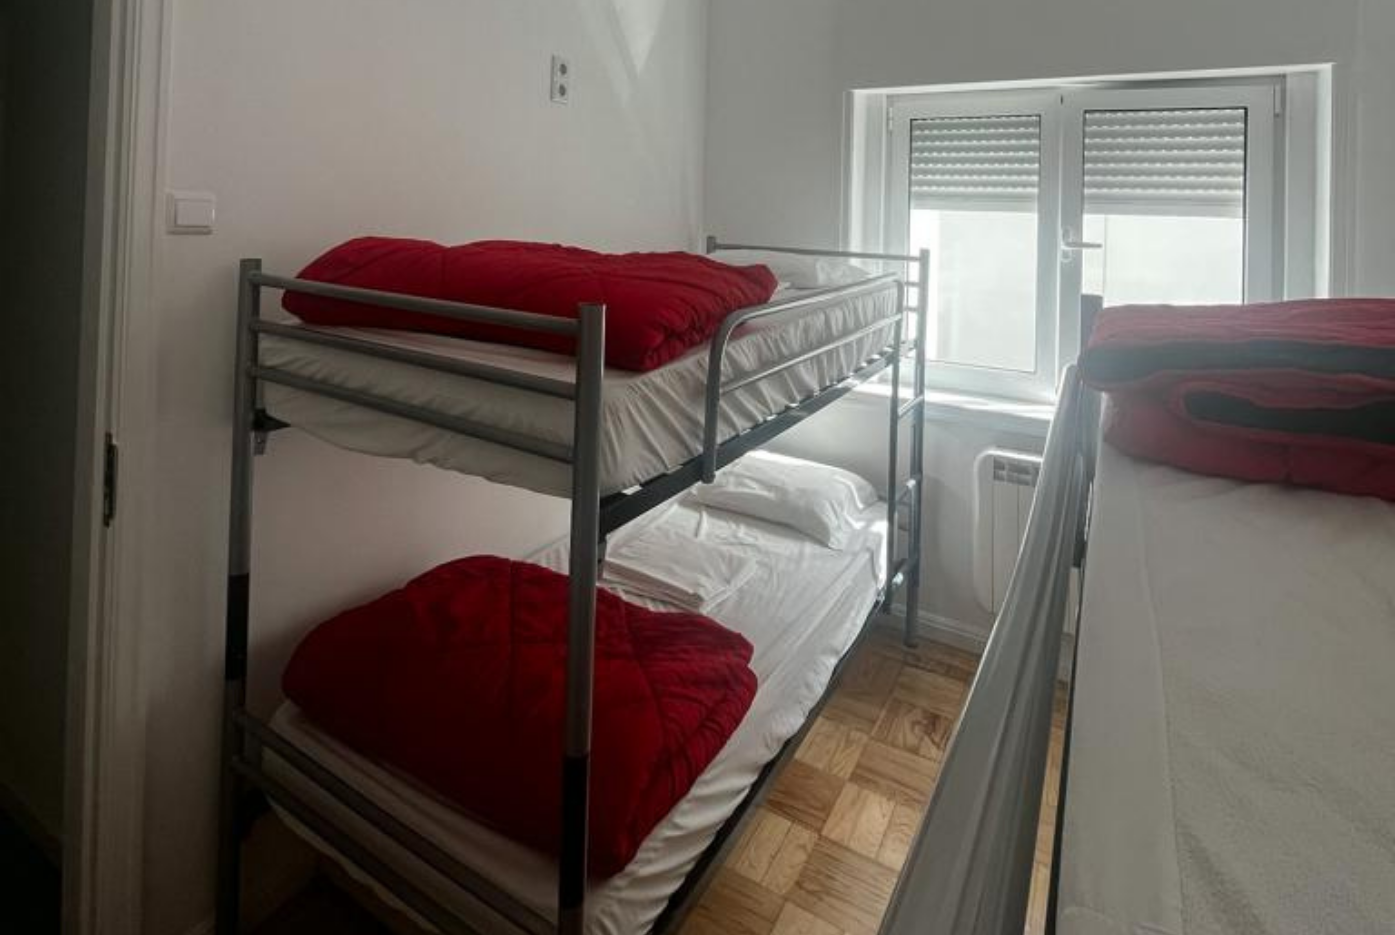 "Cork" 6-bed shared dorm in the AirPorto Hostel